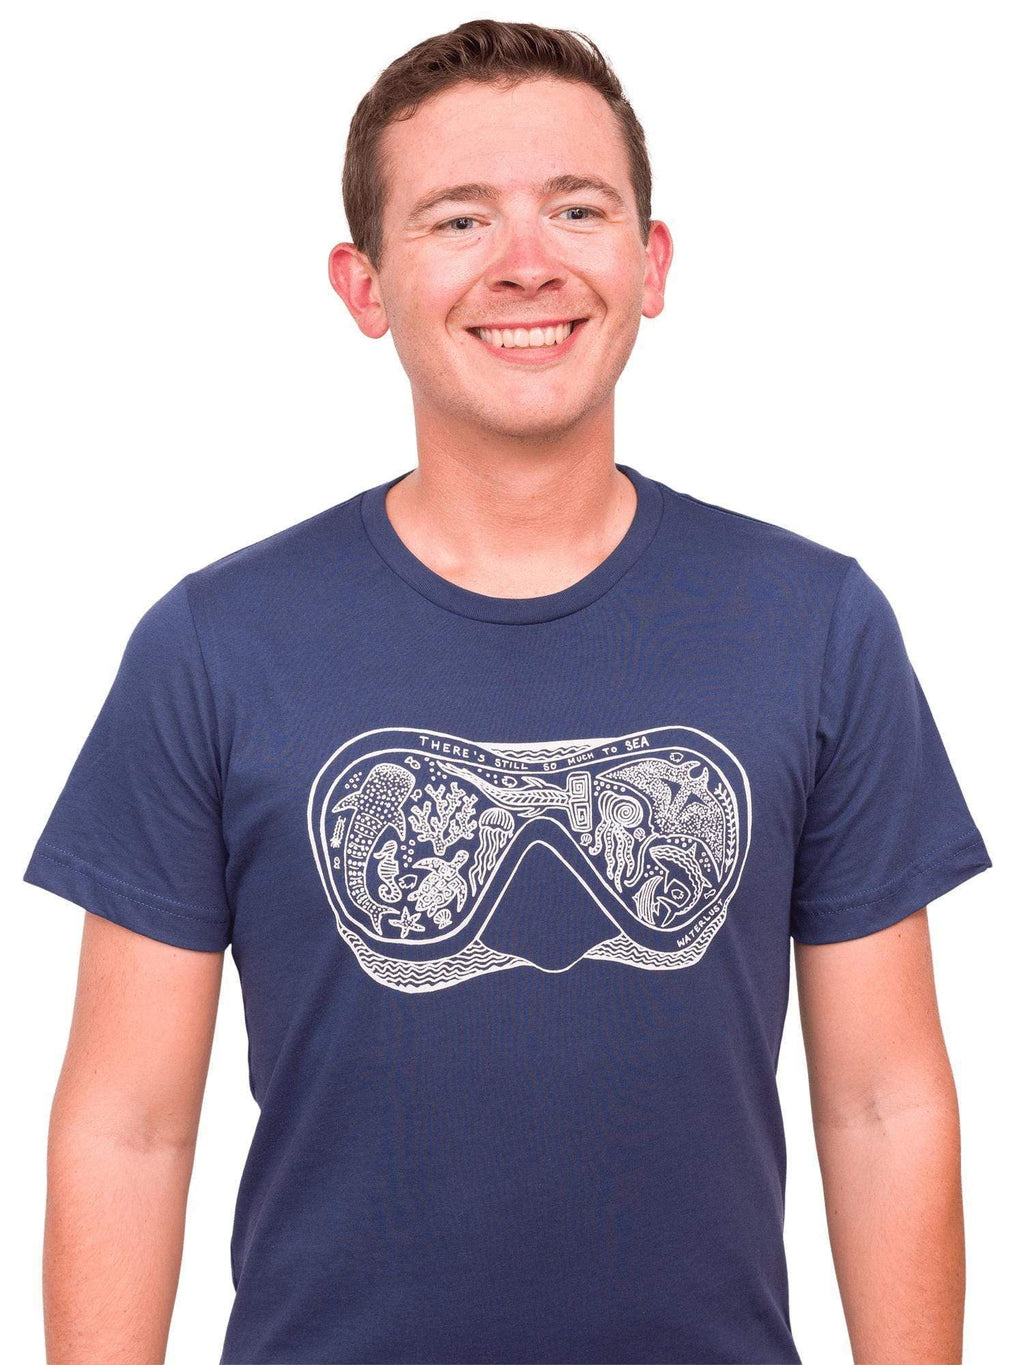 Model: Joe is a coral restoration ecologist and an avid runner. He is 5&#39;10&quot;, 145lbs and wearing a size S tee.